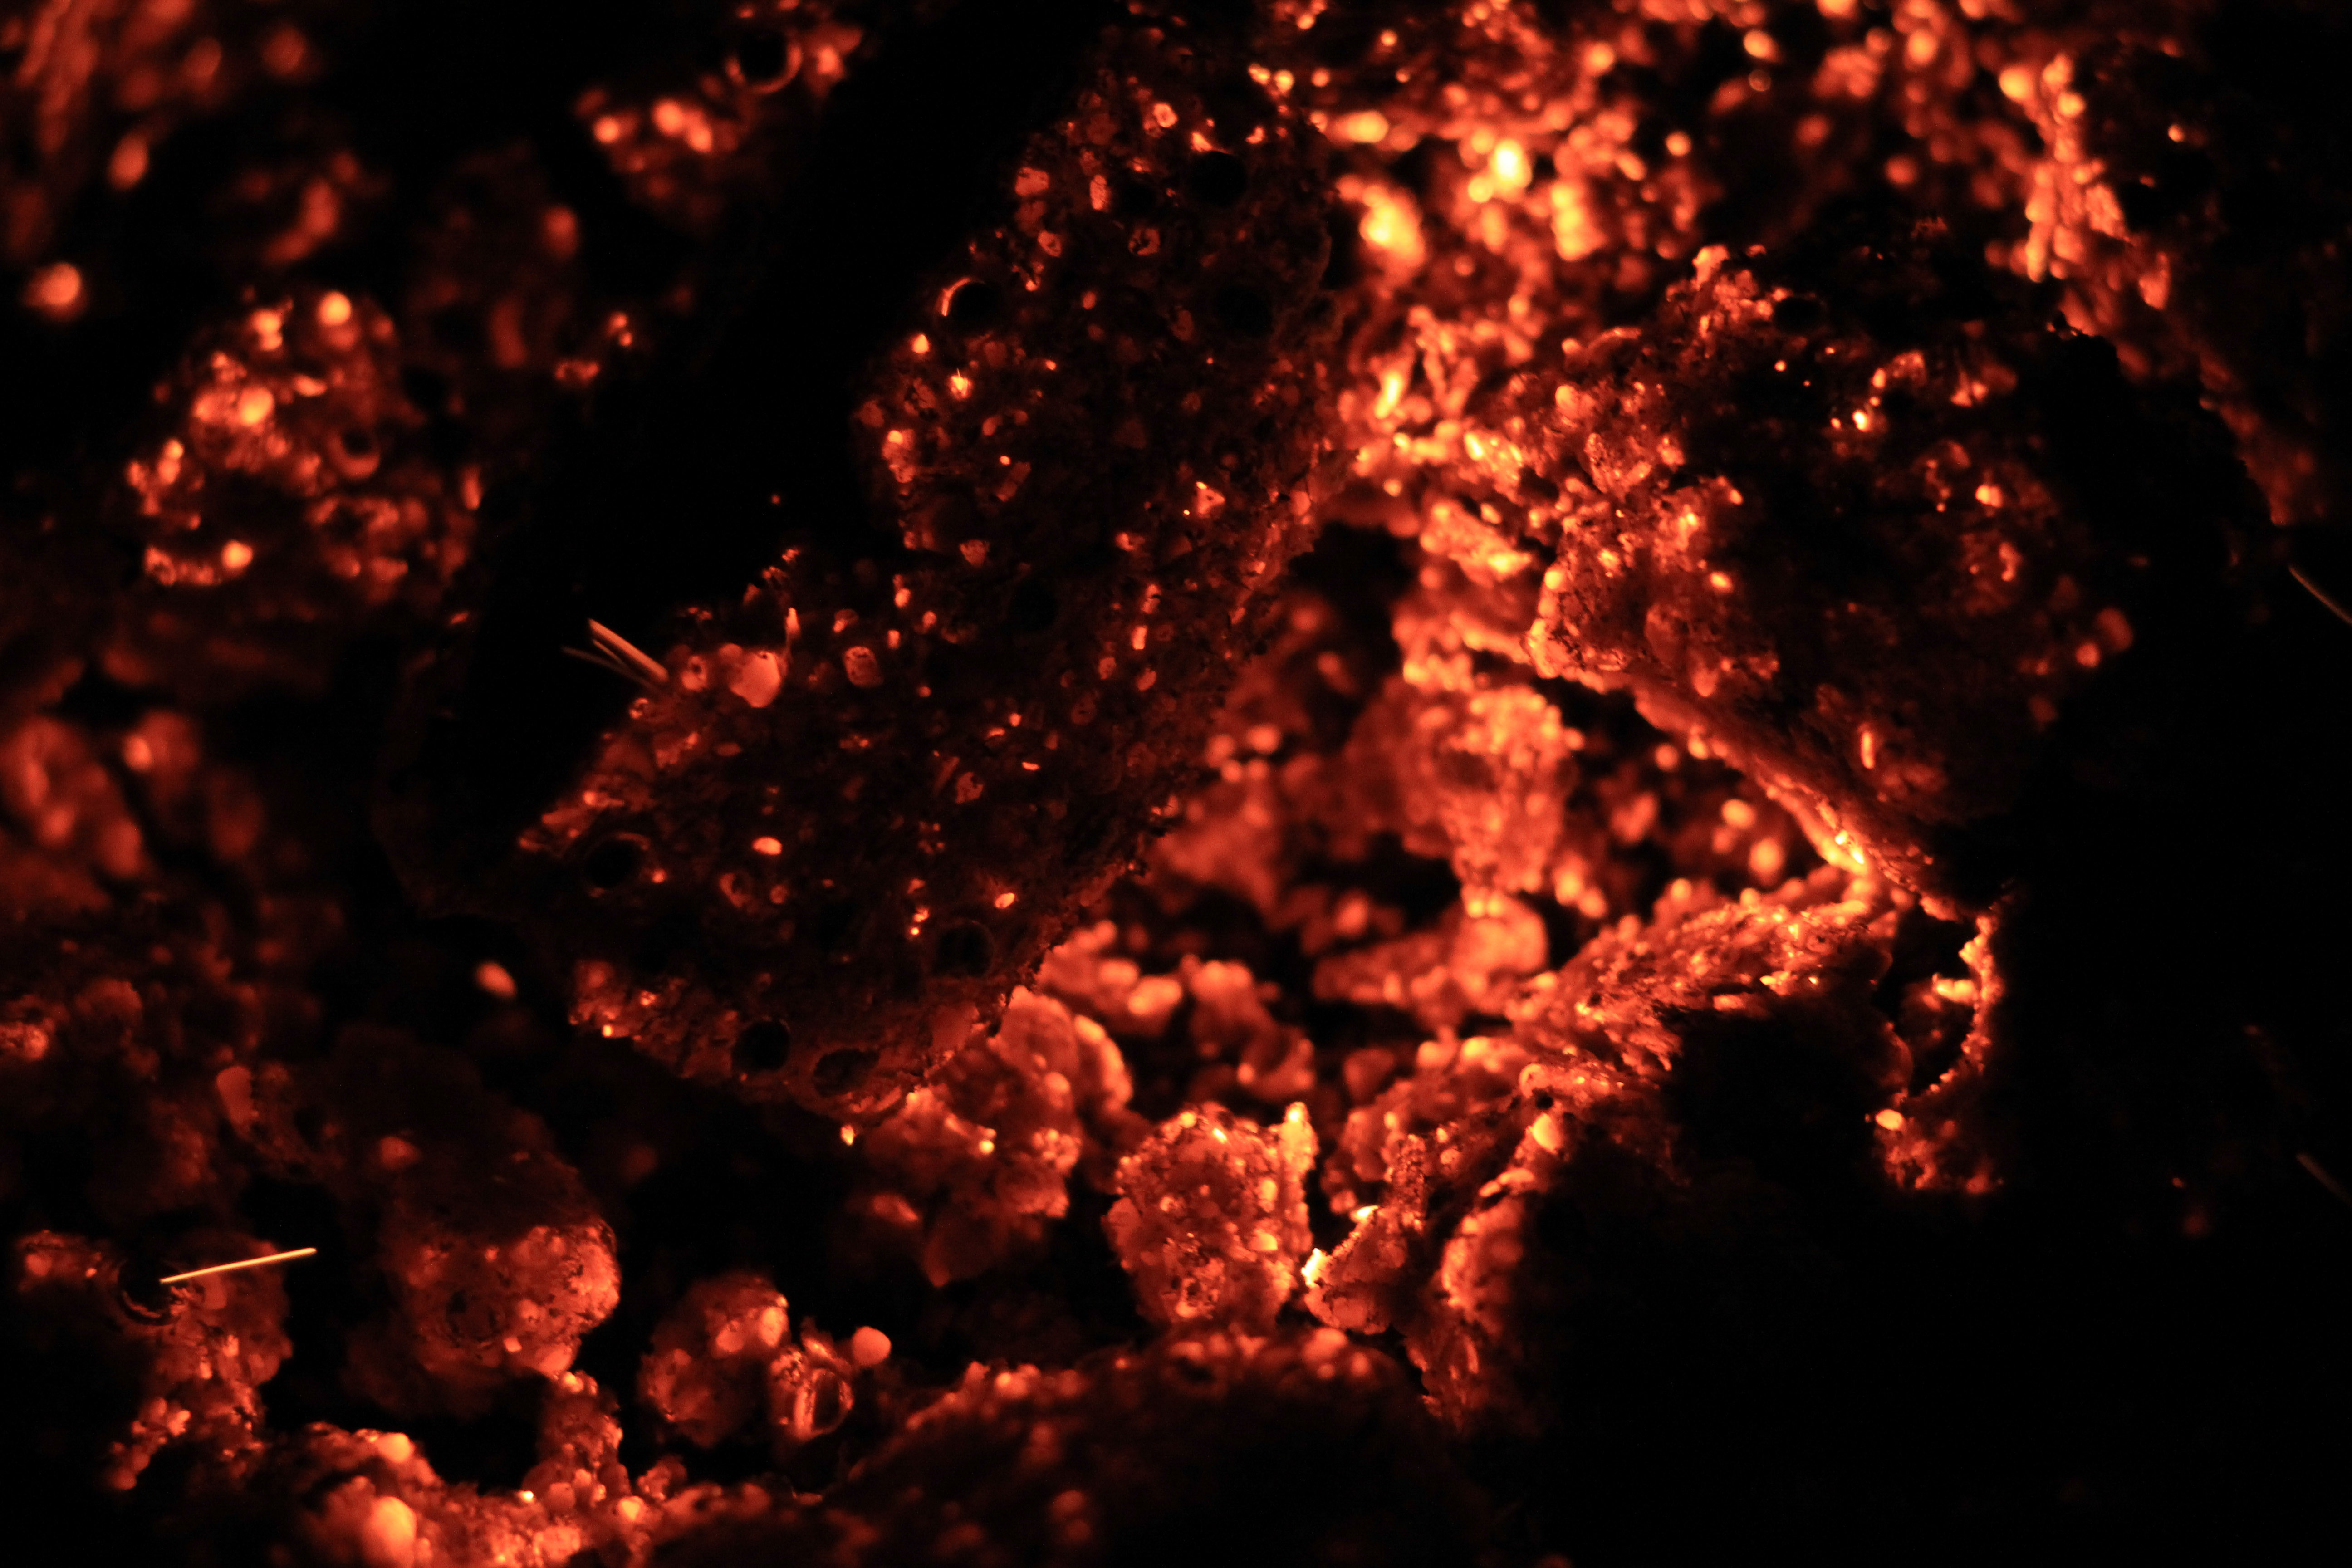 red hot texture burning coal fire place photo - TextureX- Free and ...